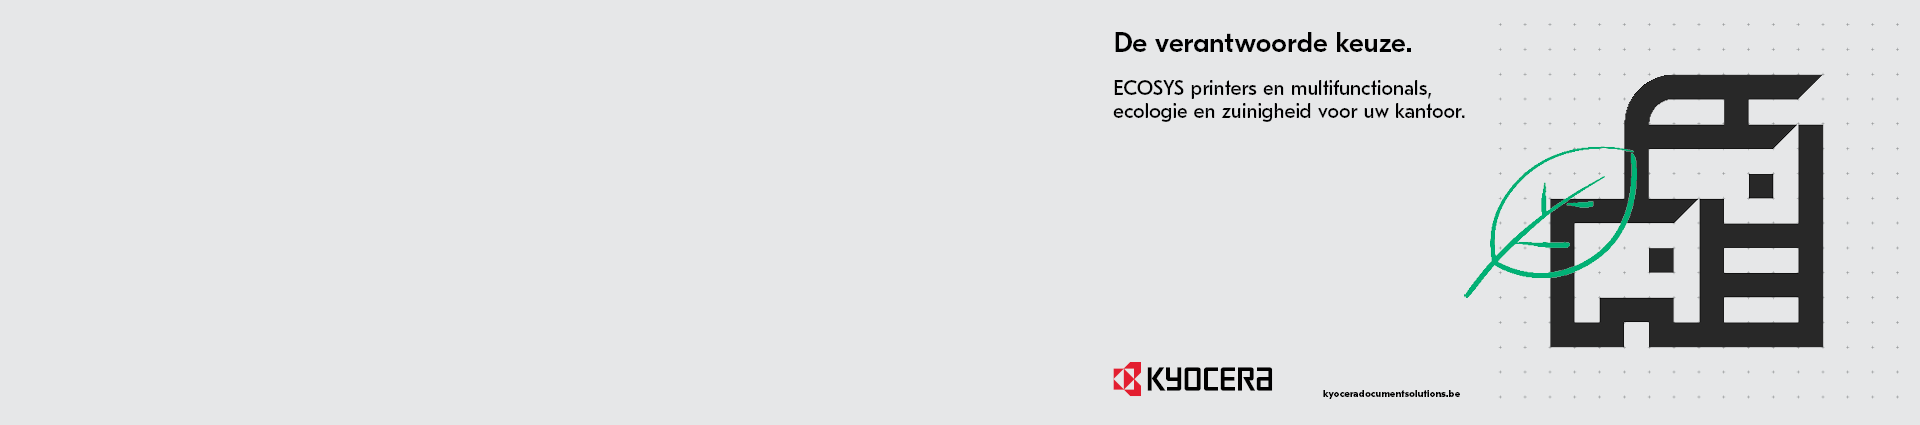 Despec-banner-homepage-economy-and-ecology-1920x425-icon_greenleaf-NL.webp